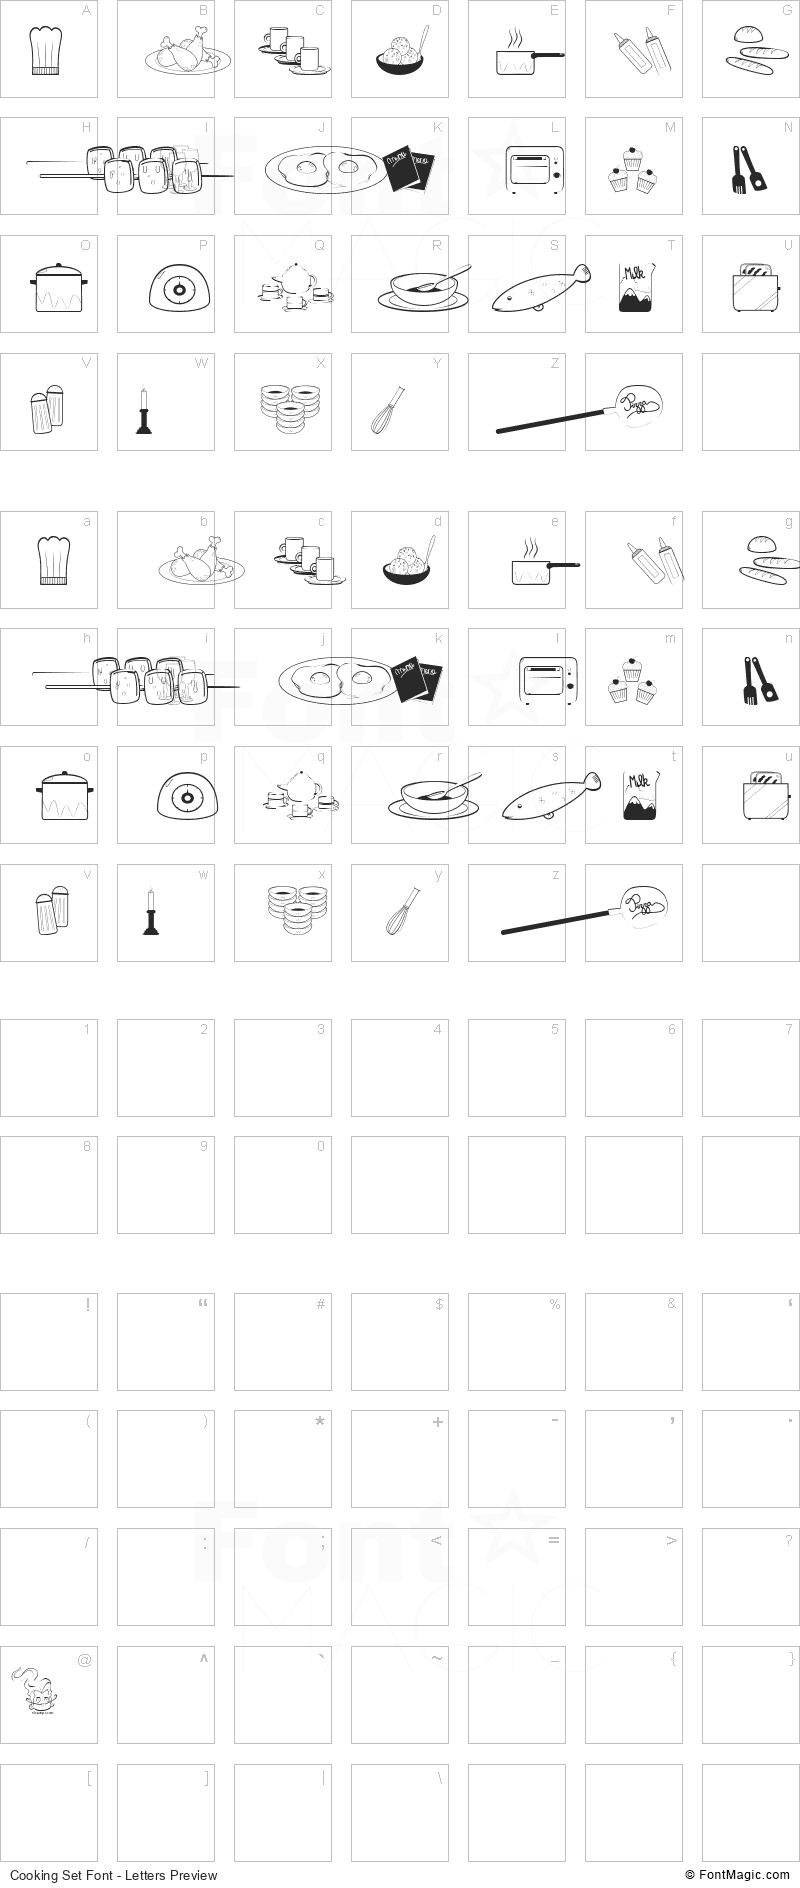 Cooking Set Font - All Latters Preview Chart